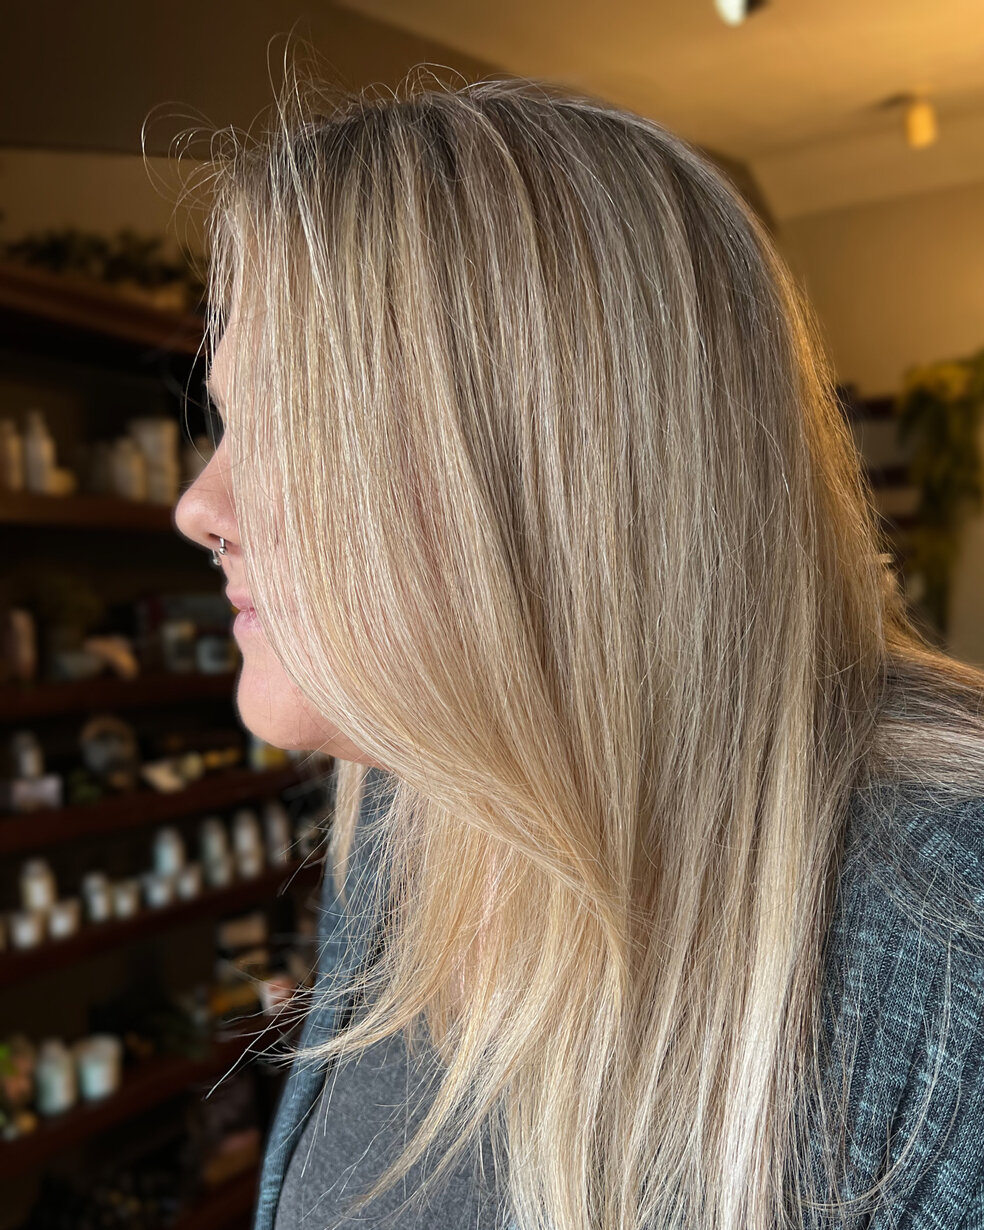 Getting ready for summer means maximum dimension! @_mollyjanehair has her gorgeous guest ready for the sunshine with this sun-kissed, bright blonde! ☀️ Molly used our Davines Heart of Glaze sheer glaze when blow drying this beautiful blonde to streng